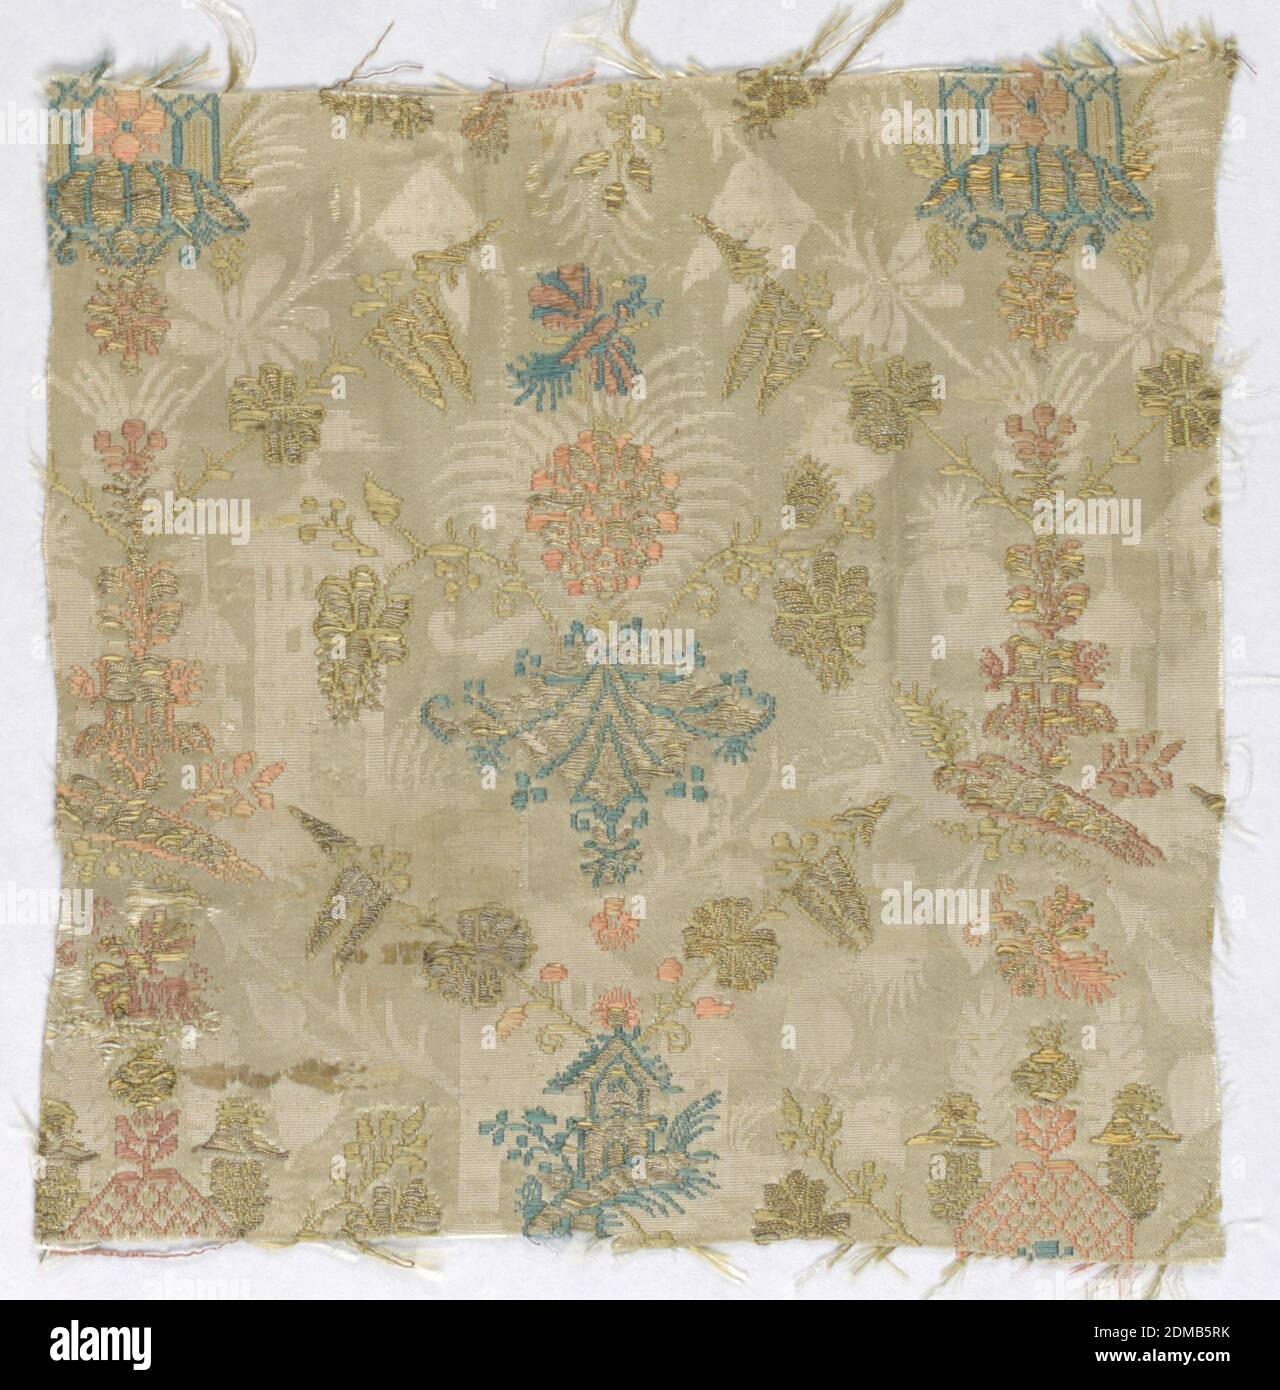 Fragment, Medium: silk, metal thread Technique: damassé foundation (8 harness satin plus plain weave). Satin patterned by floats of discontinuous supplementary wefts, Fragment of a pattern of two alternating verticals: architectural motifs, ornamental garden-like buildings, and flowers. Two lances from the top of a building in each row create a loose diamond lattic. Two level patterns; gold and muted colors on an ivory damassé background., France, late 17th century, woven textiles, Fragment Stock Photo